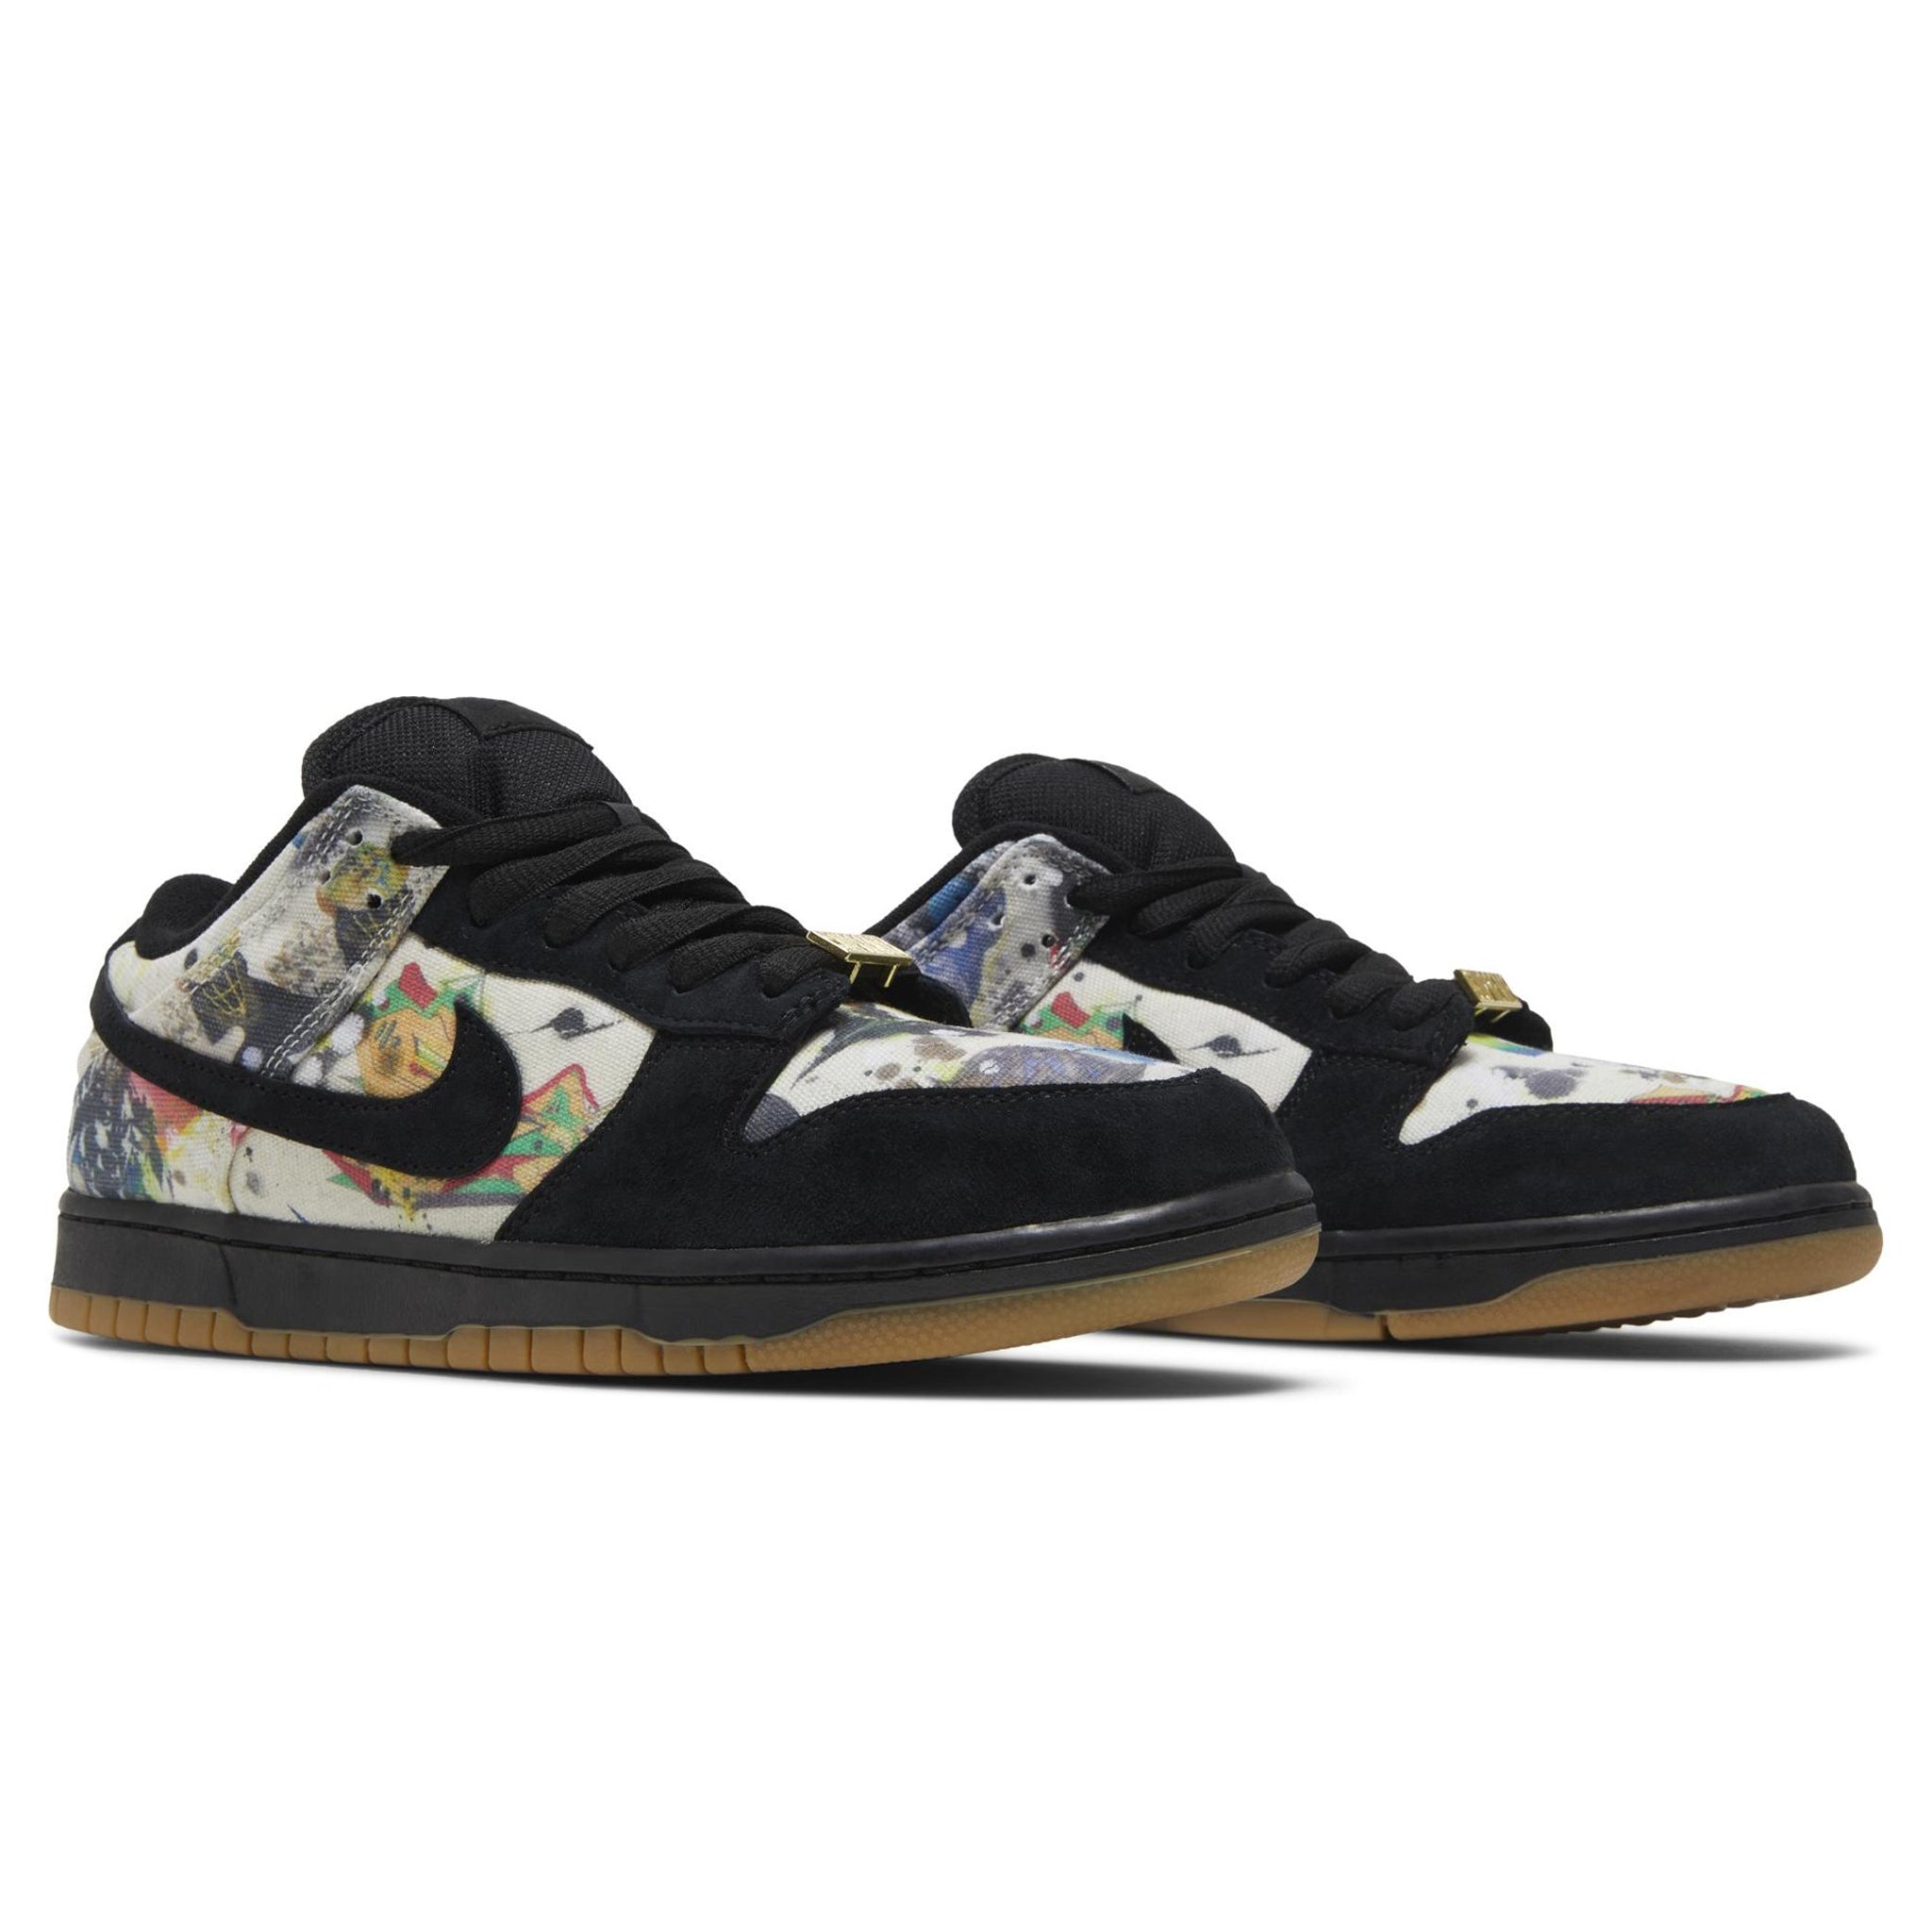 Front side view of Supreme x Nike SB Dunk Low Rammellzee FD8778-001